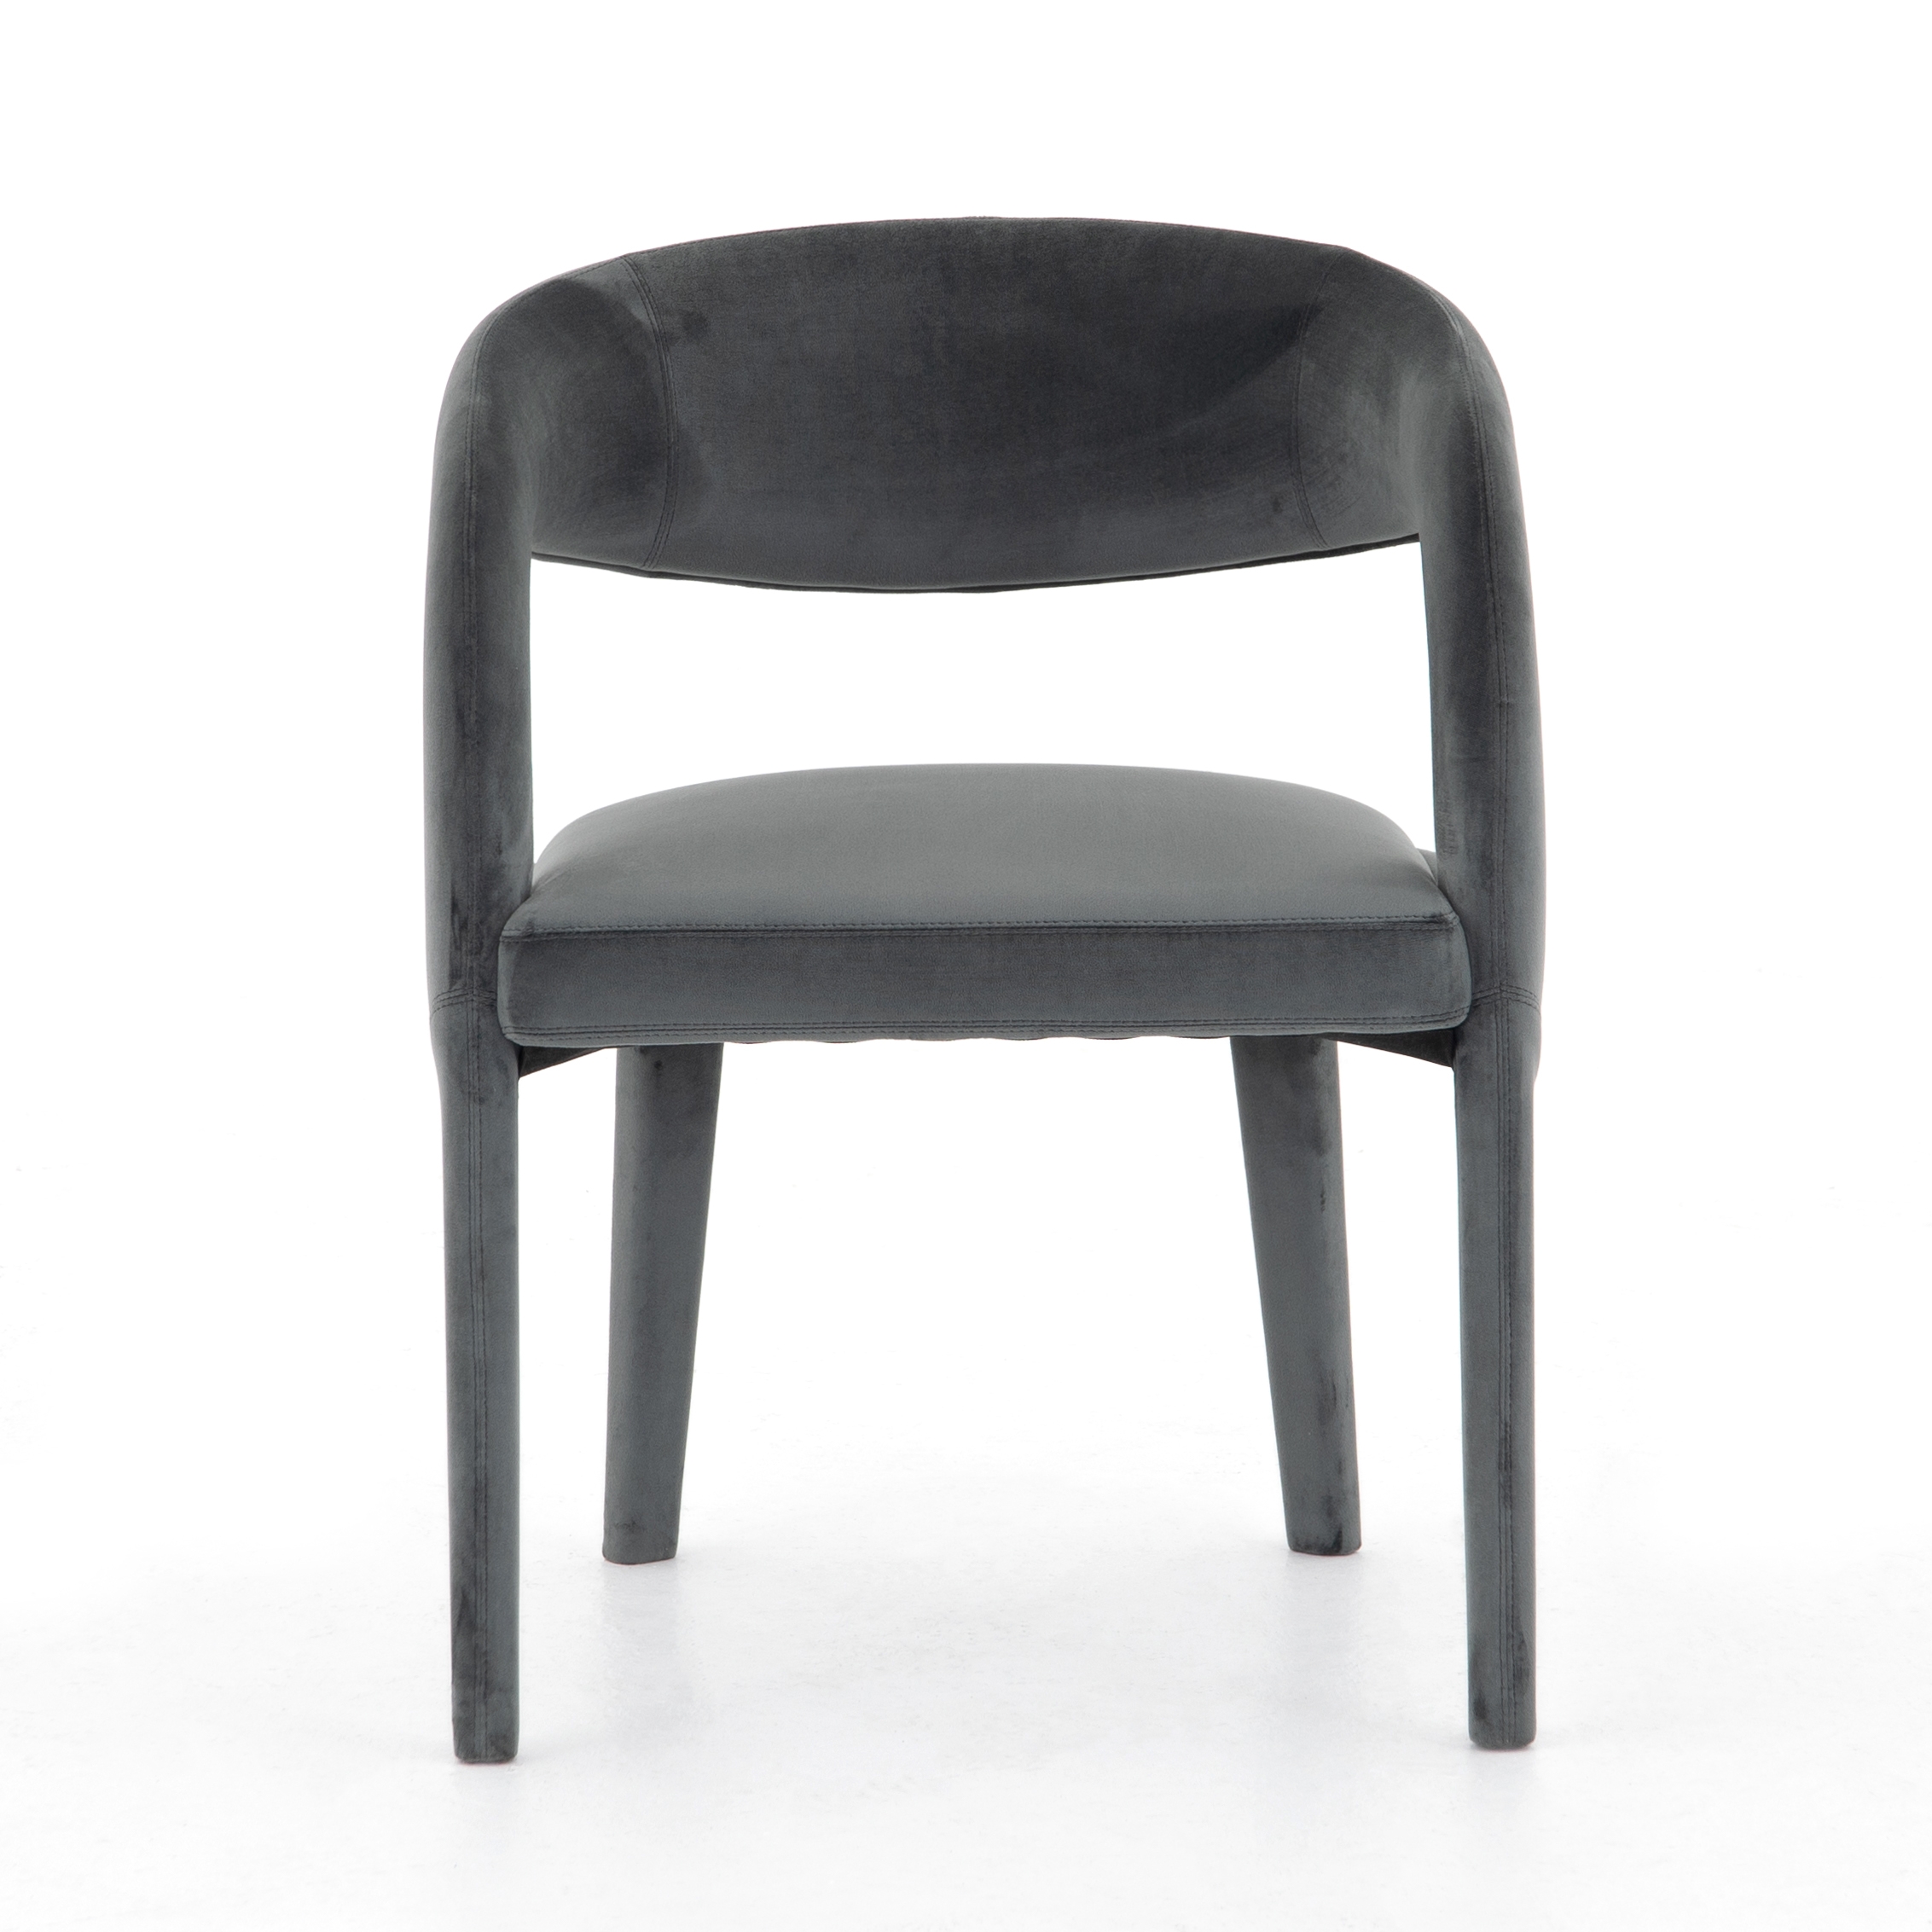 Hawkins Dining Chair-Charcoal Velvet - Image 3